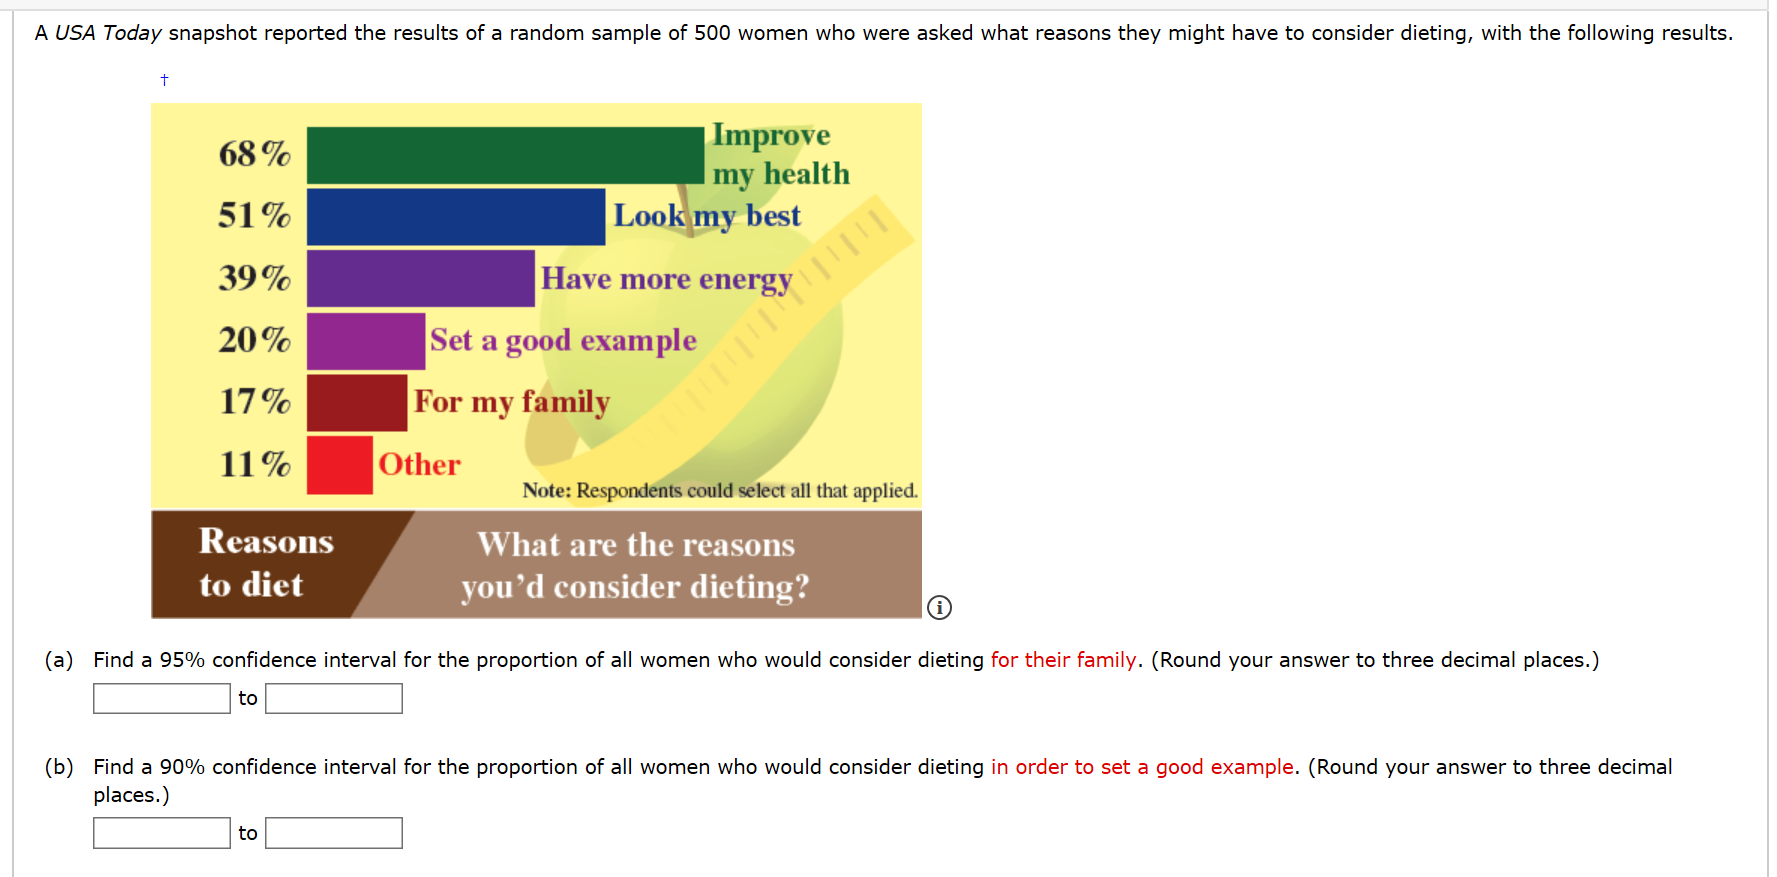 A USA Today snapshot reported the results of a random sample of 500 women who were asked what reasons they might have to consider dieting, with the following results.
Improve
my health
Look my best
68 %
51%
39%
Have more
20%
Set a good example
17%
For my family
11%
Other
Note: Respondents could select all that applied.
Reasons
What are the reasons
to diet
you'd consider dieting?
(a) Find a 95% confidence interval for the proportion of all women who would consider dieting for their family. (Round your answer to three decimal places.)
to
(b) Find a 90% confidence interval for the proportion of all women who would consider dieting in order to set a good example. (Round your answer to three decimal
places.)
to
